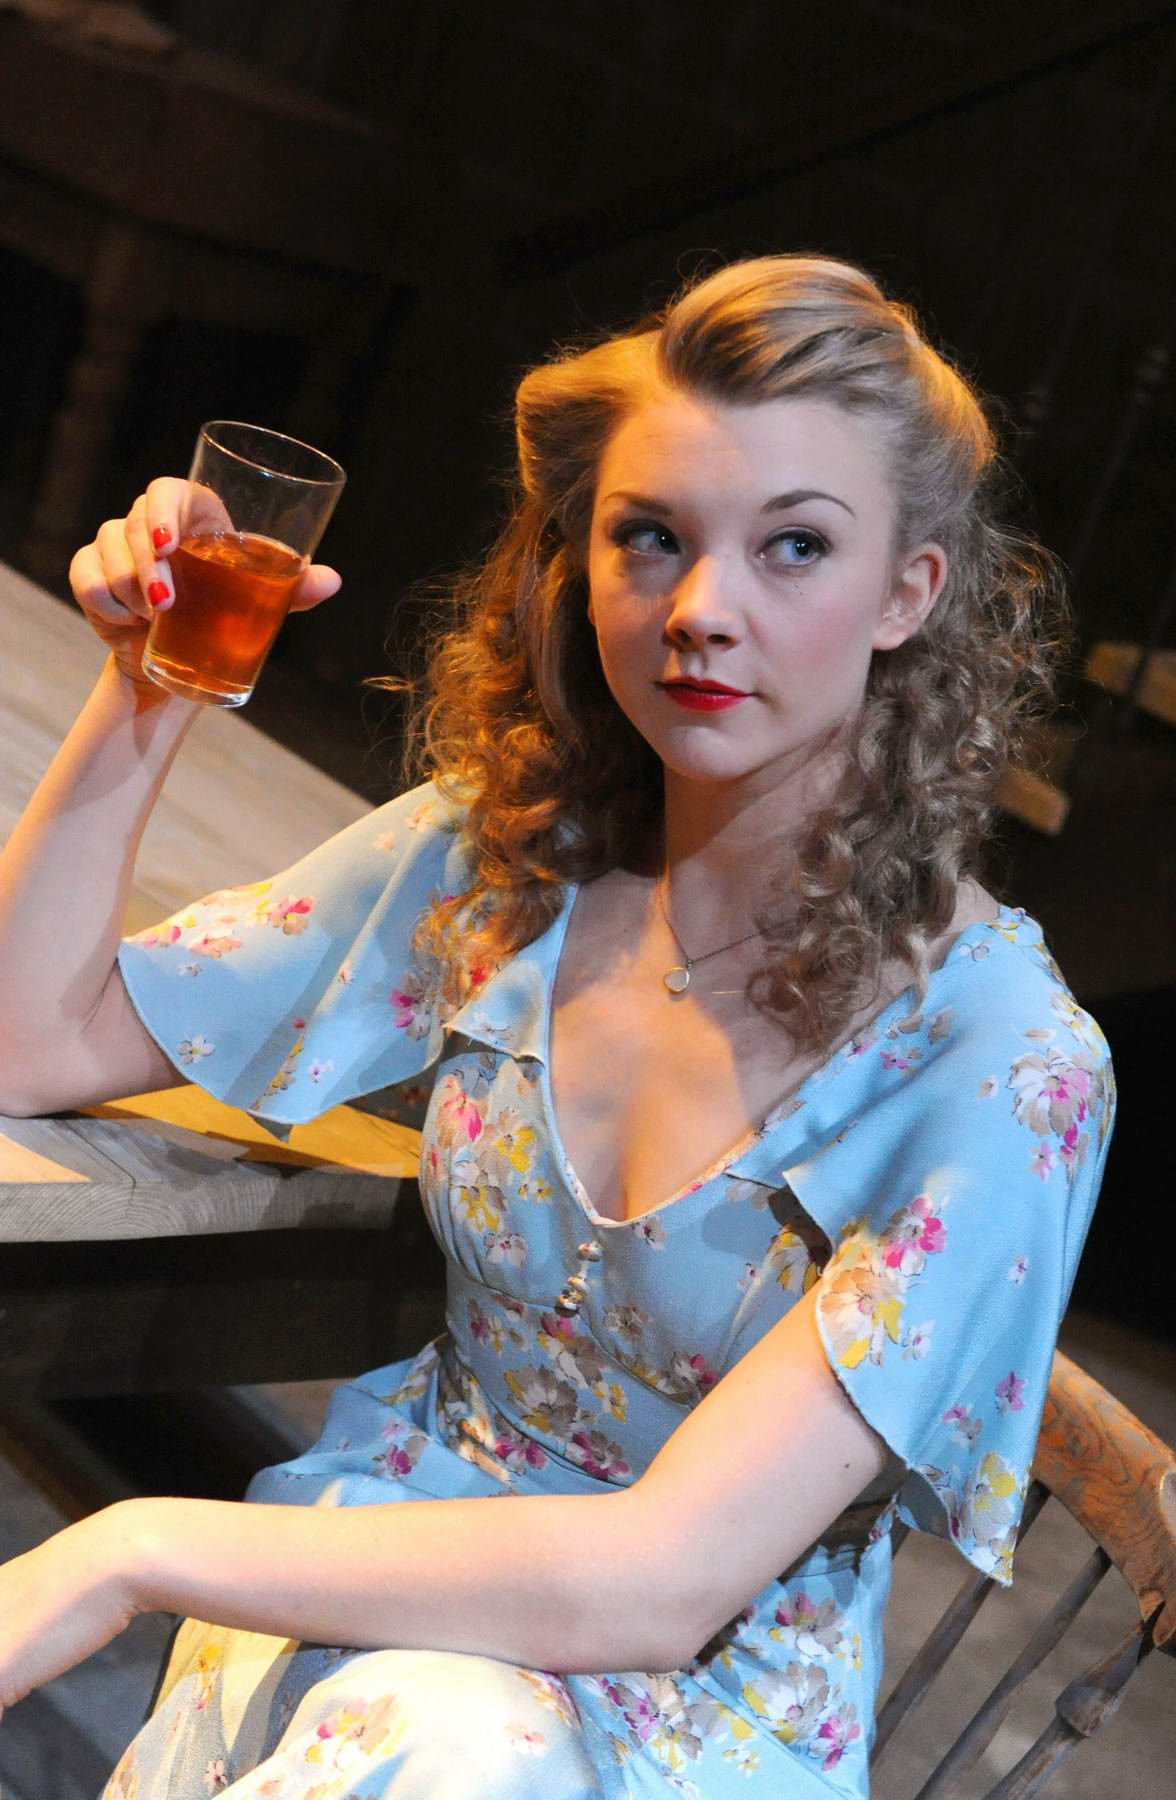 Natalie Dormer performing in the play "Venus in Fur" at the Theatre